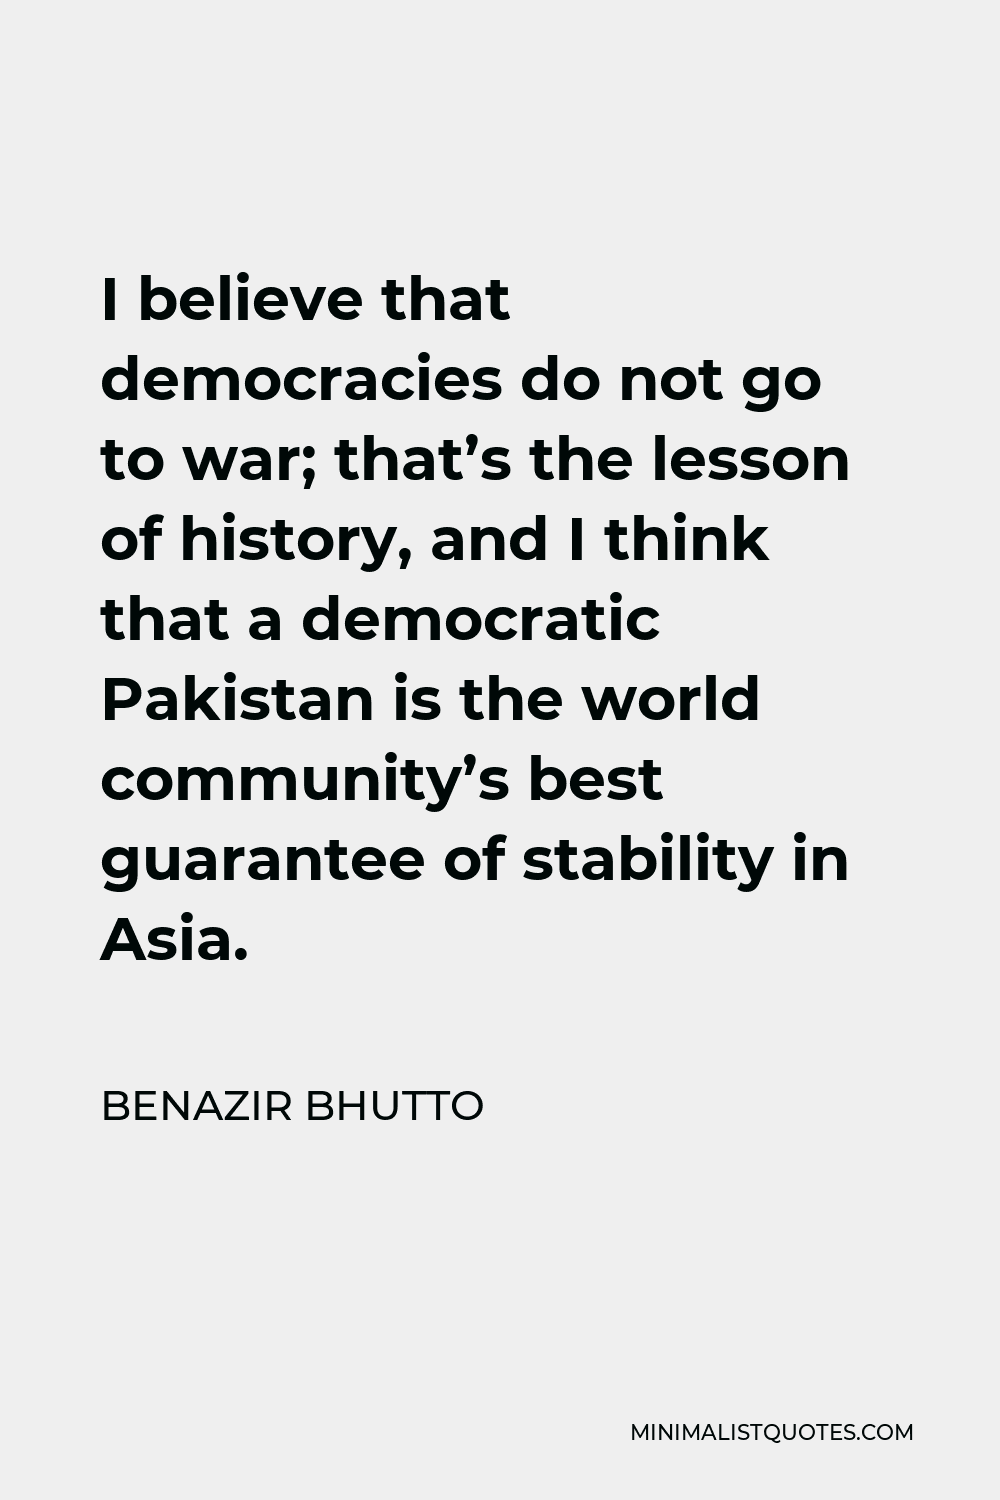 Benazir Bhutto Quote - I believe that democracies do not go to war; that’s the lesson of history, and I think that a democratic Pakistan is the world community’s best guarantee of stability in Asia.